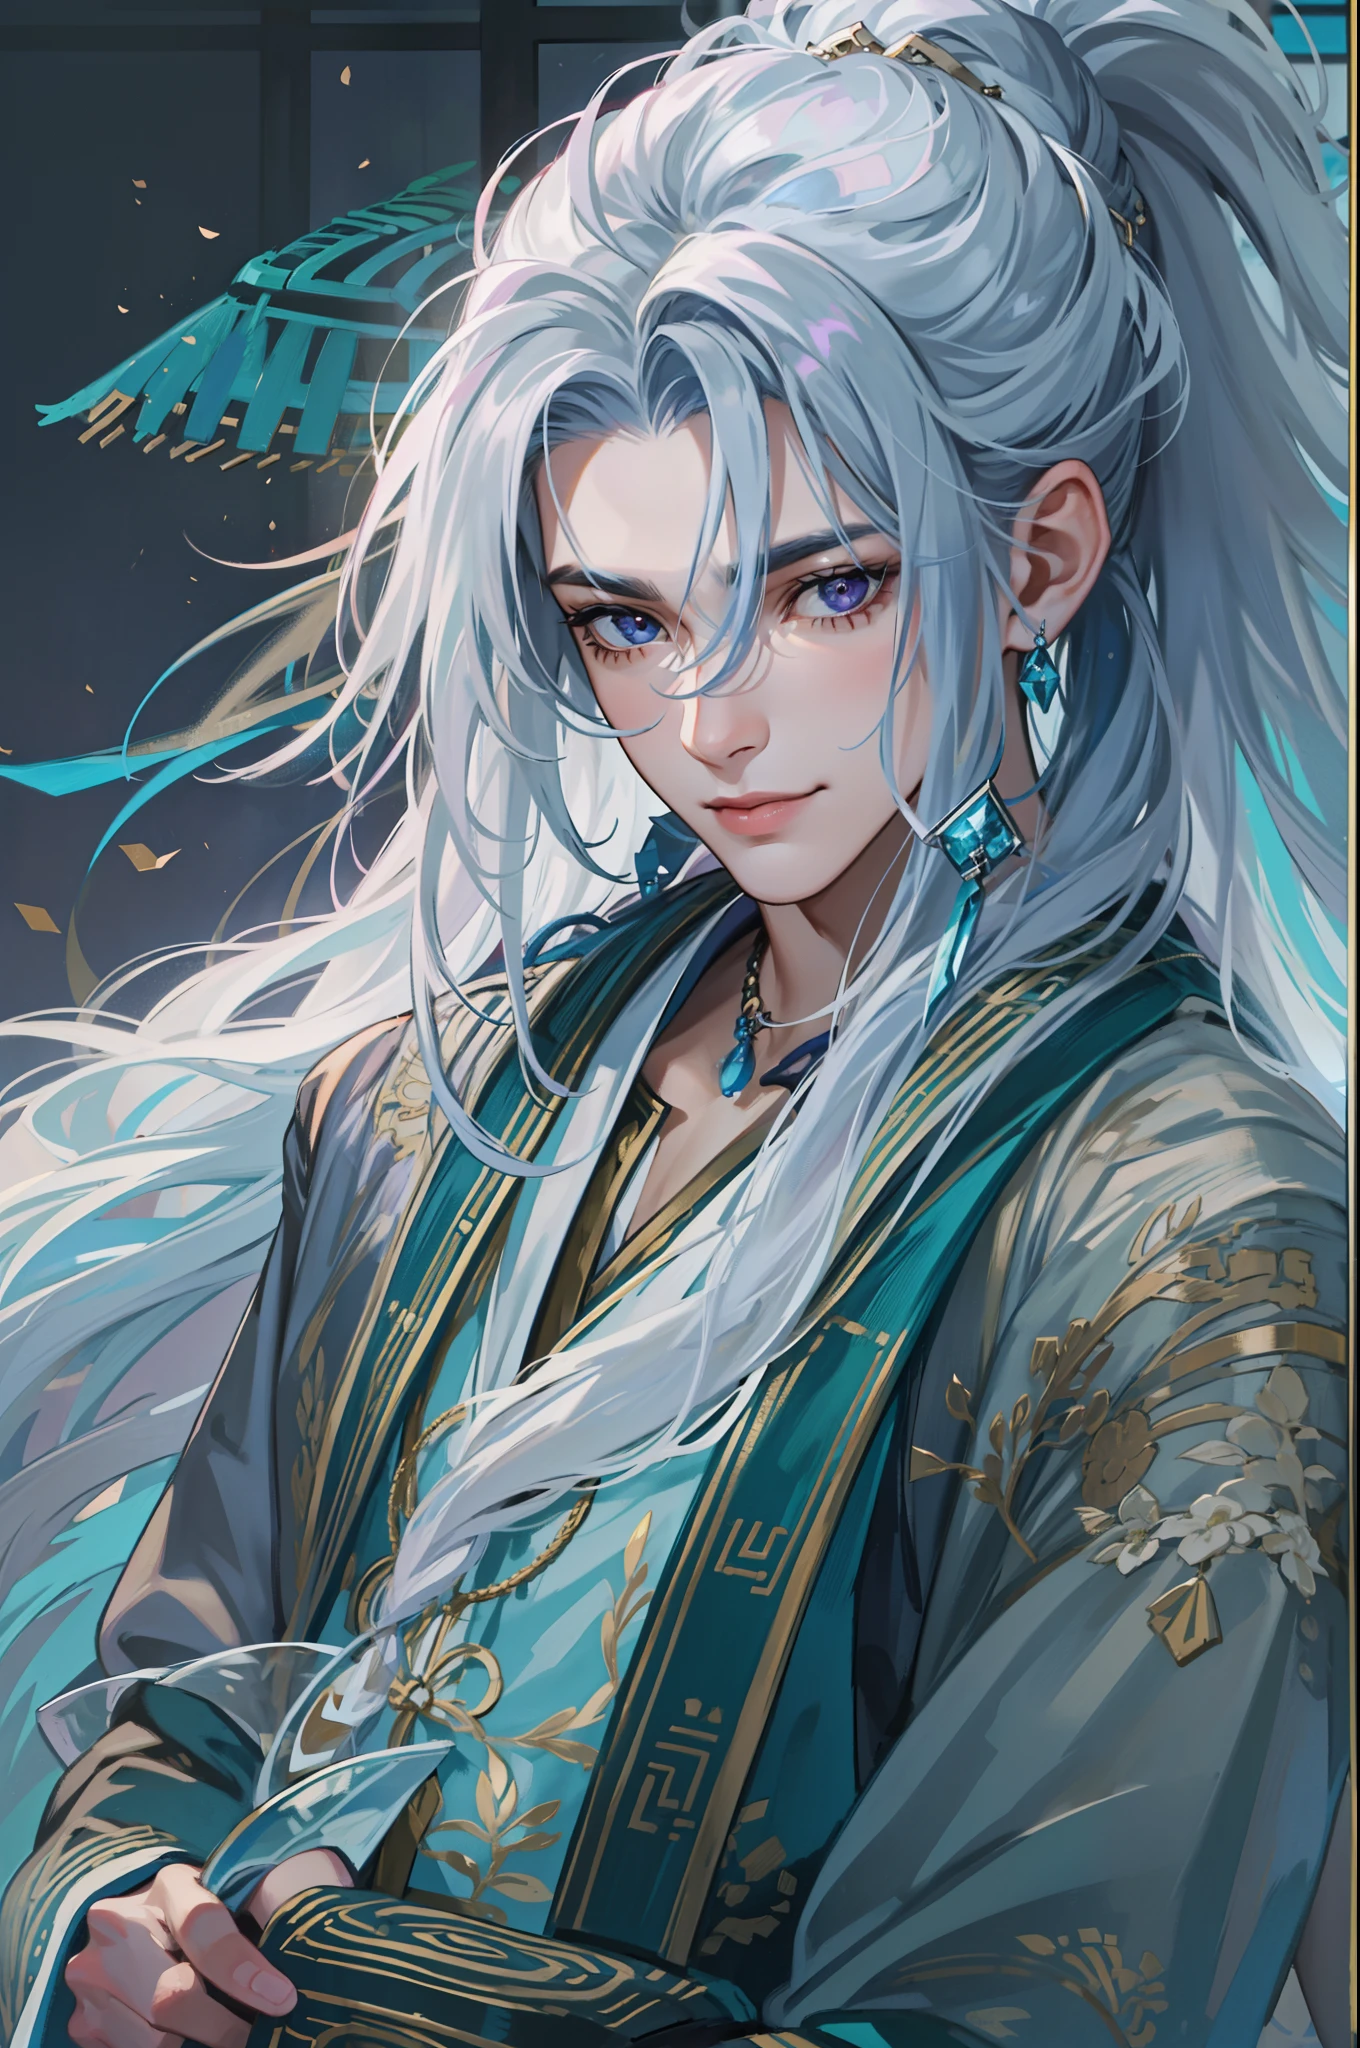 Best quality at best，tmasterpiece，very detailed wallpaper，Long hair in a ponytail，Purple eye，Hide arms，bblurry，longer sleeves，blur backgroun，solo，1boy，mature，Handsome and handsome，blue hairs，Chinese outfit，Righteous handsome feeling，malefocus，looking at viewert，long sword，gown，hair adornments, ssmile，facial closeups，Face portrait，clubs，Ice